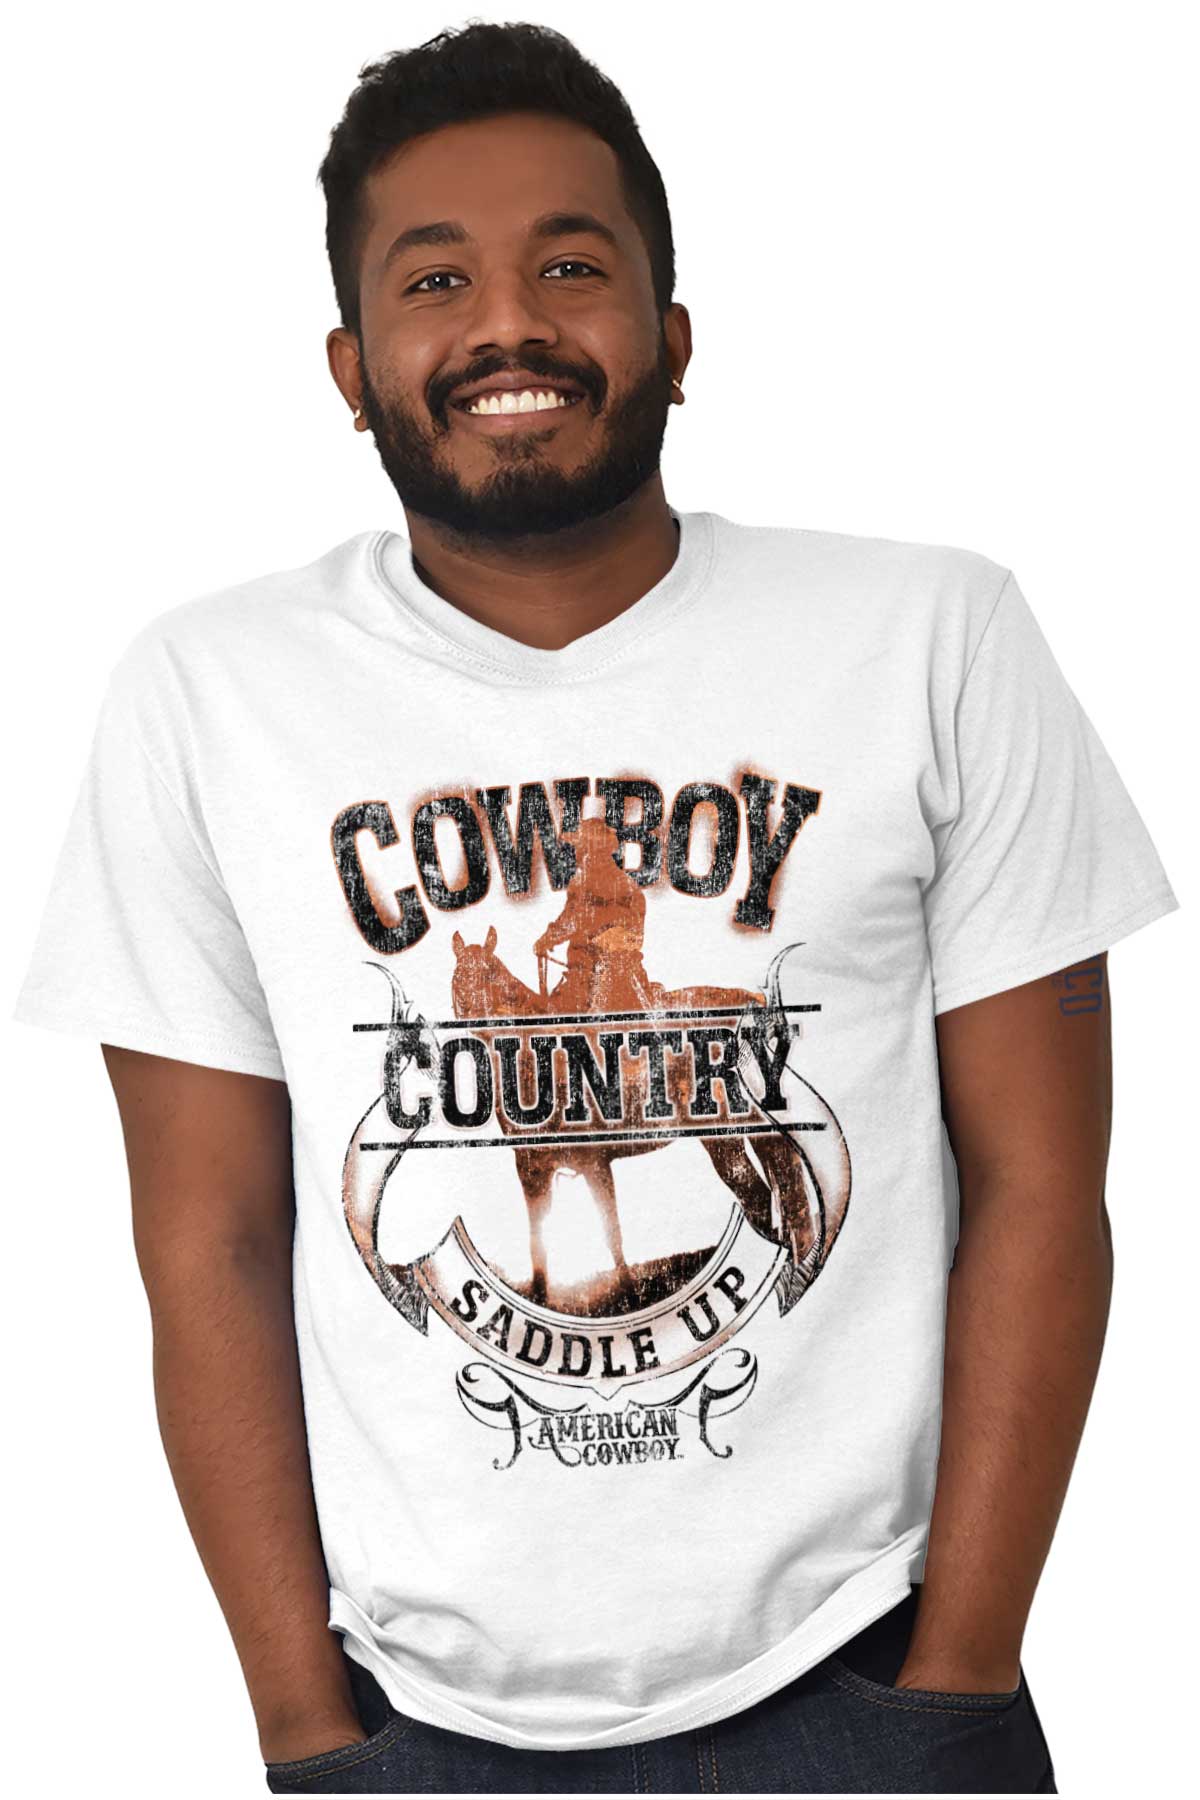 Saddle Up Country Western Cowboy Men's Graphic T Shirt Tees Brisco Brands S - image 5 of 5